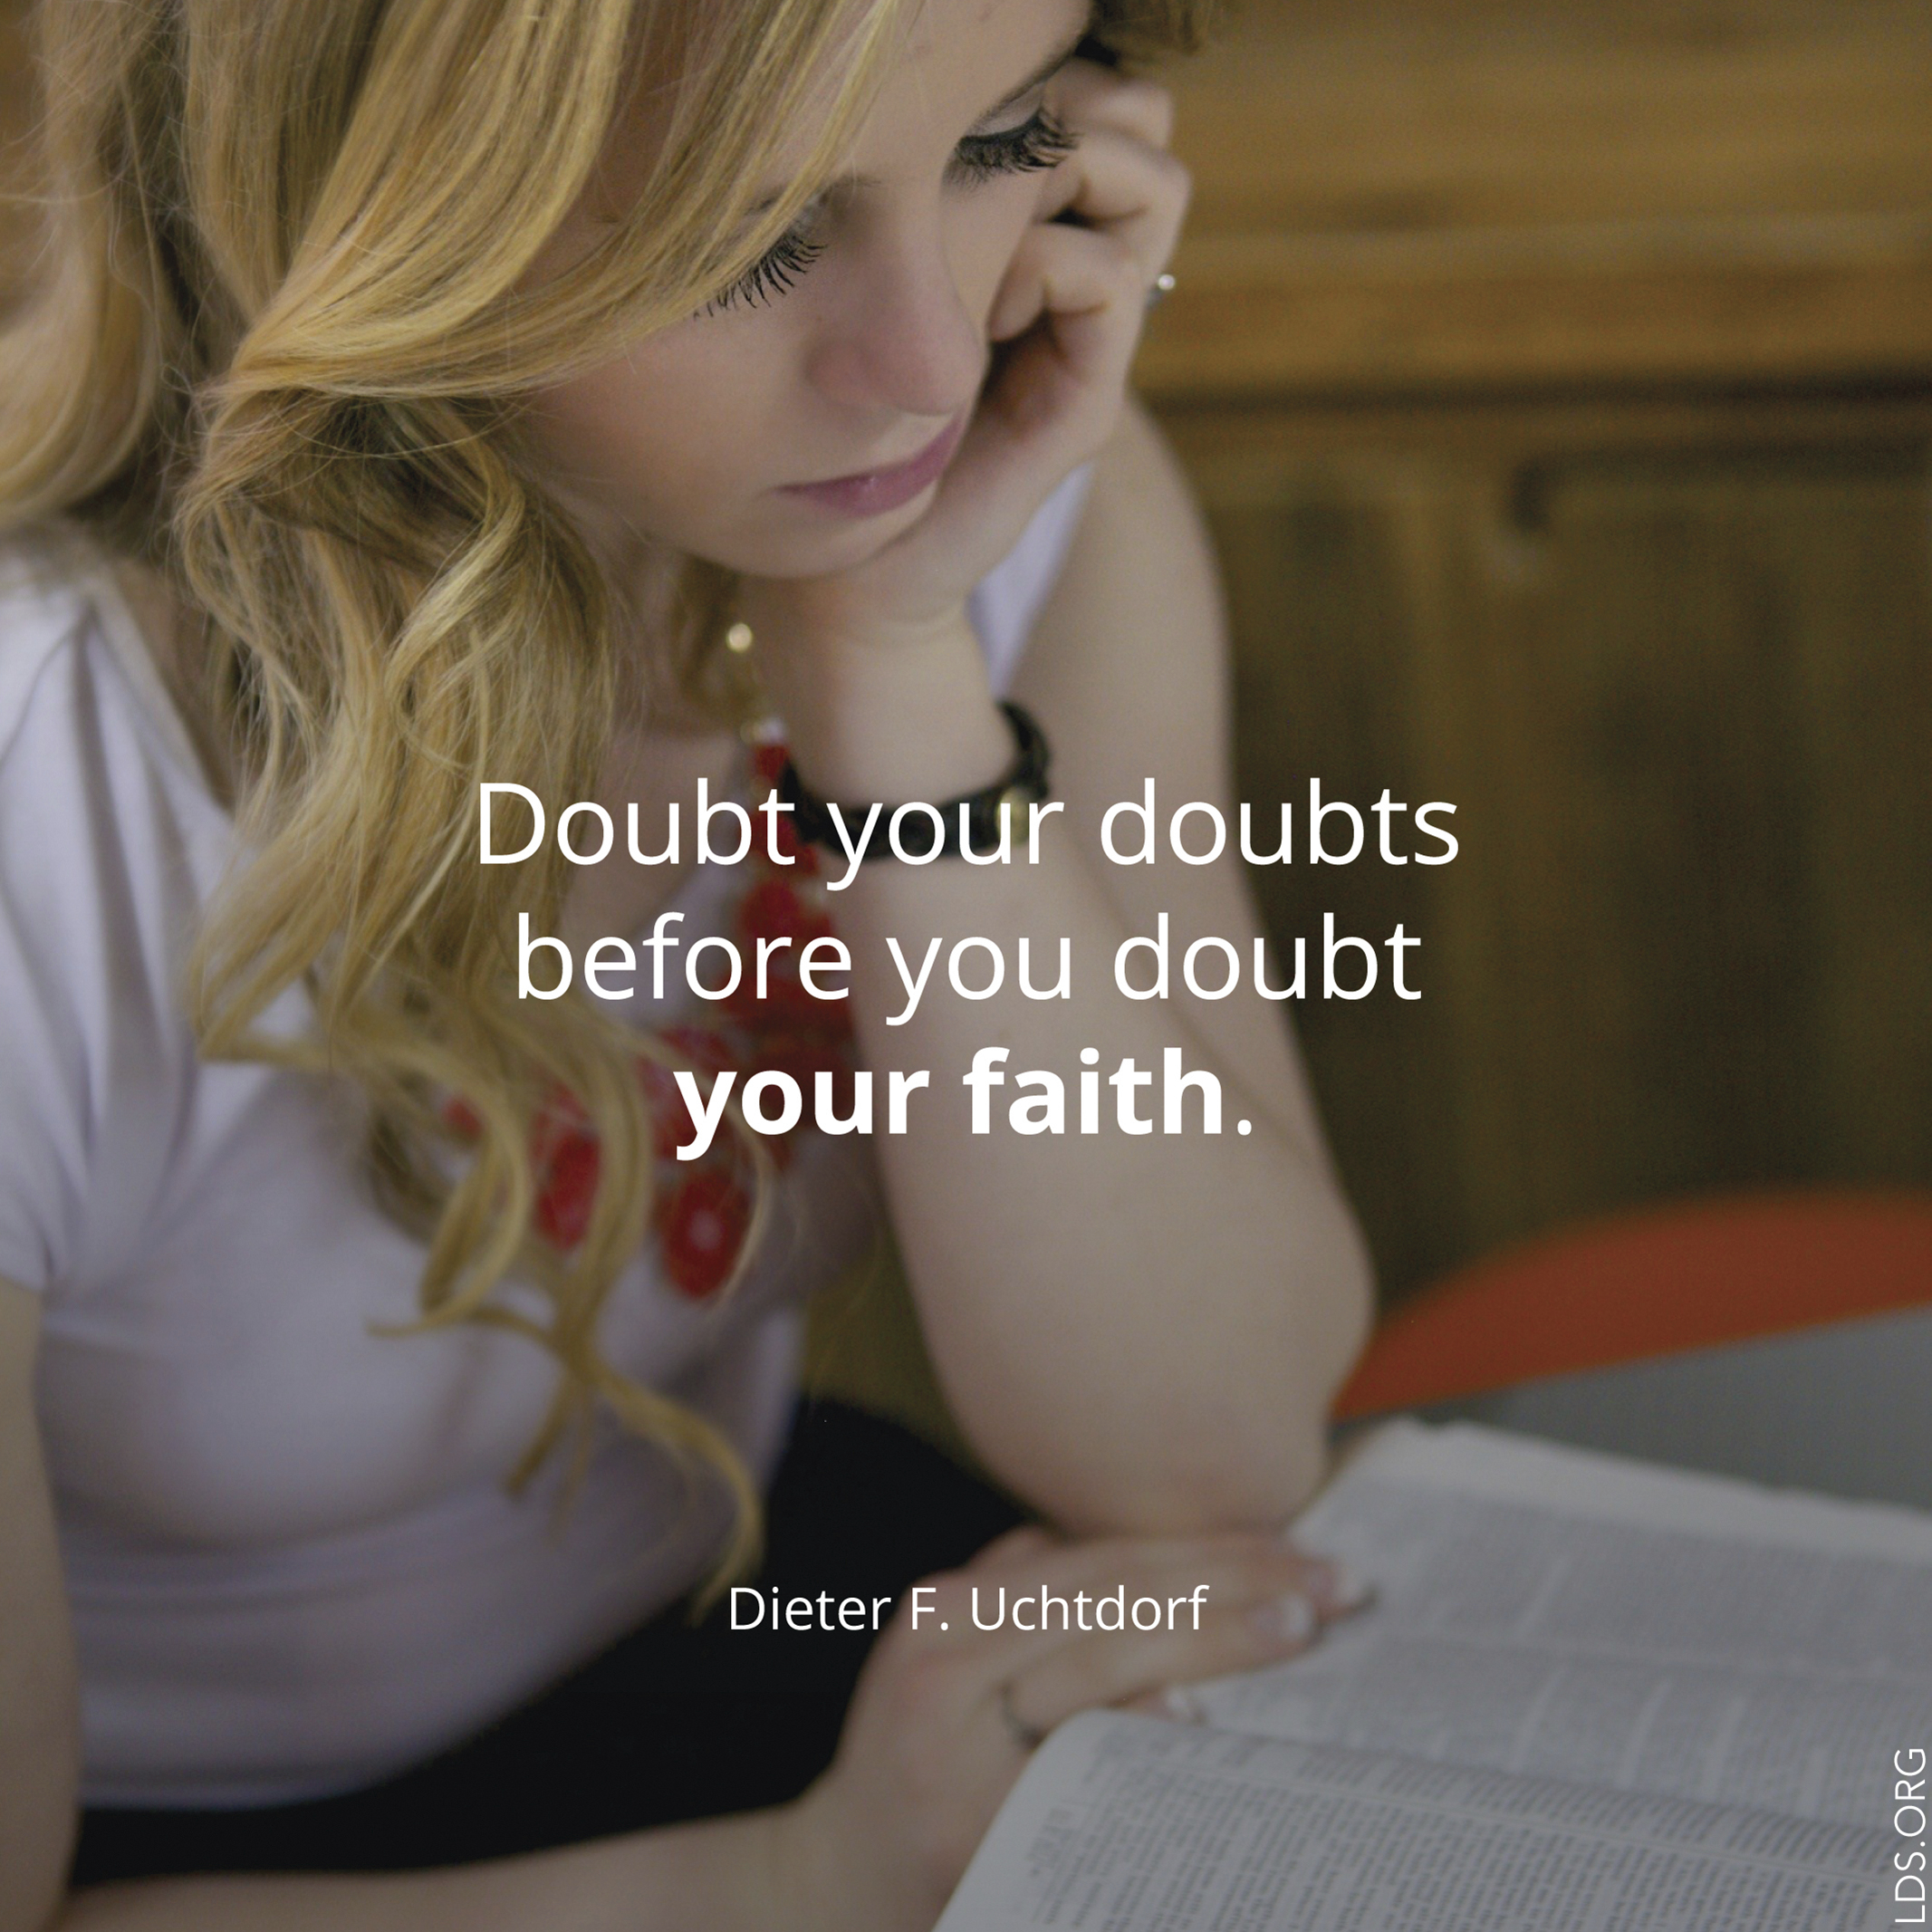 “Doubt your doubts before you doubt your faith.”—President Dieter F. Uchtdorf, “Come, Join with Us”